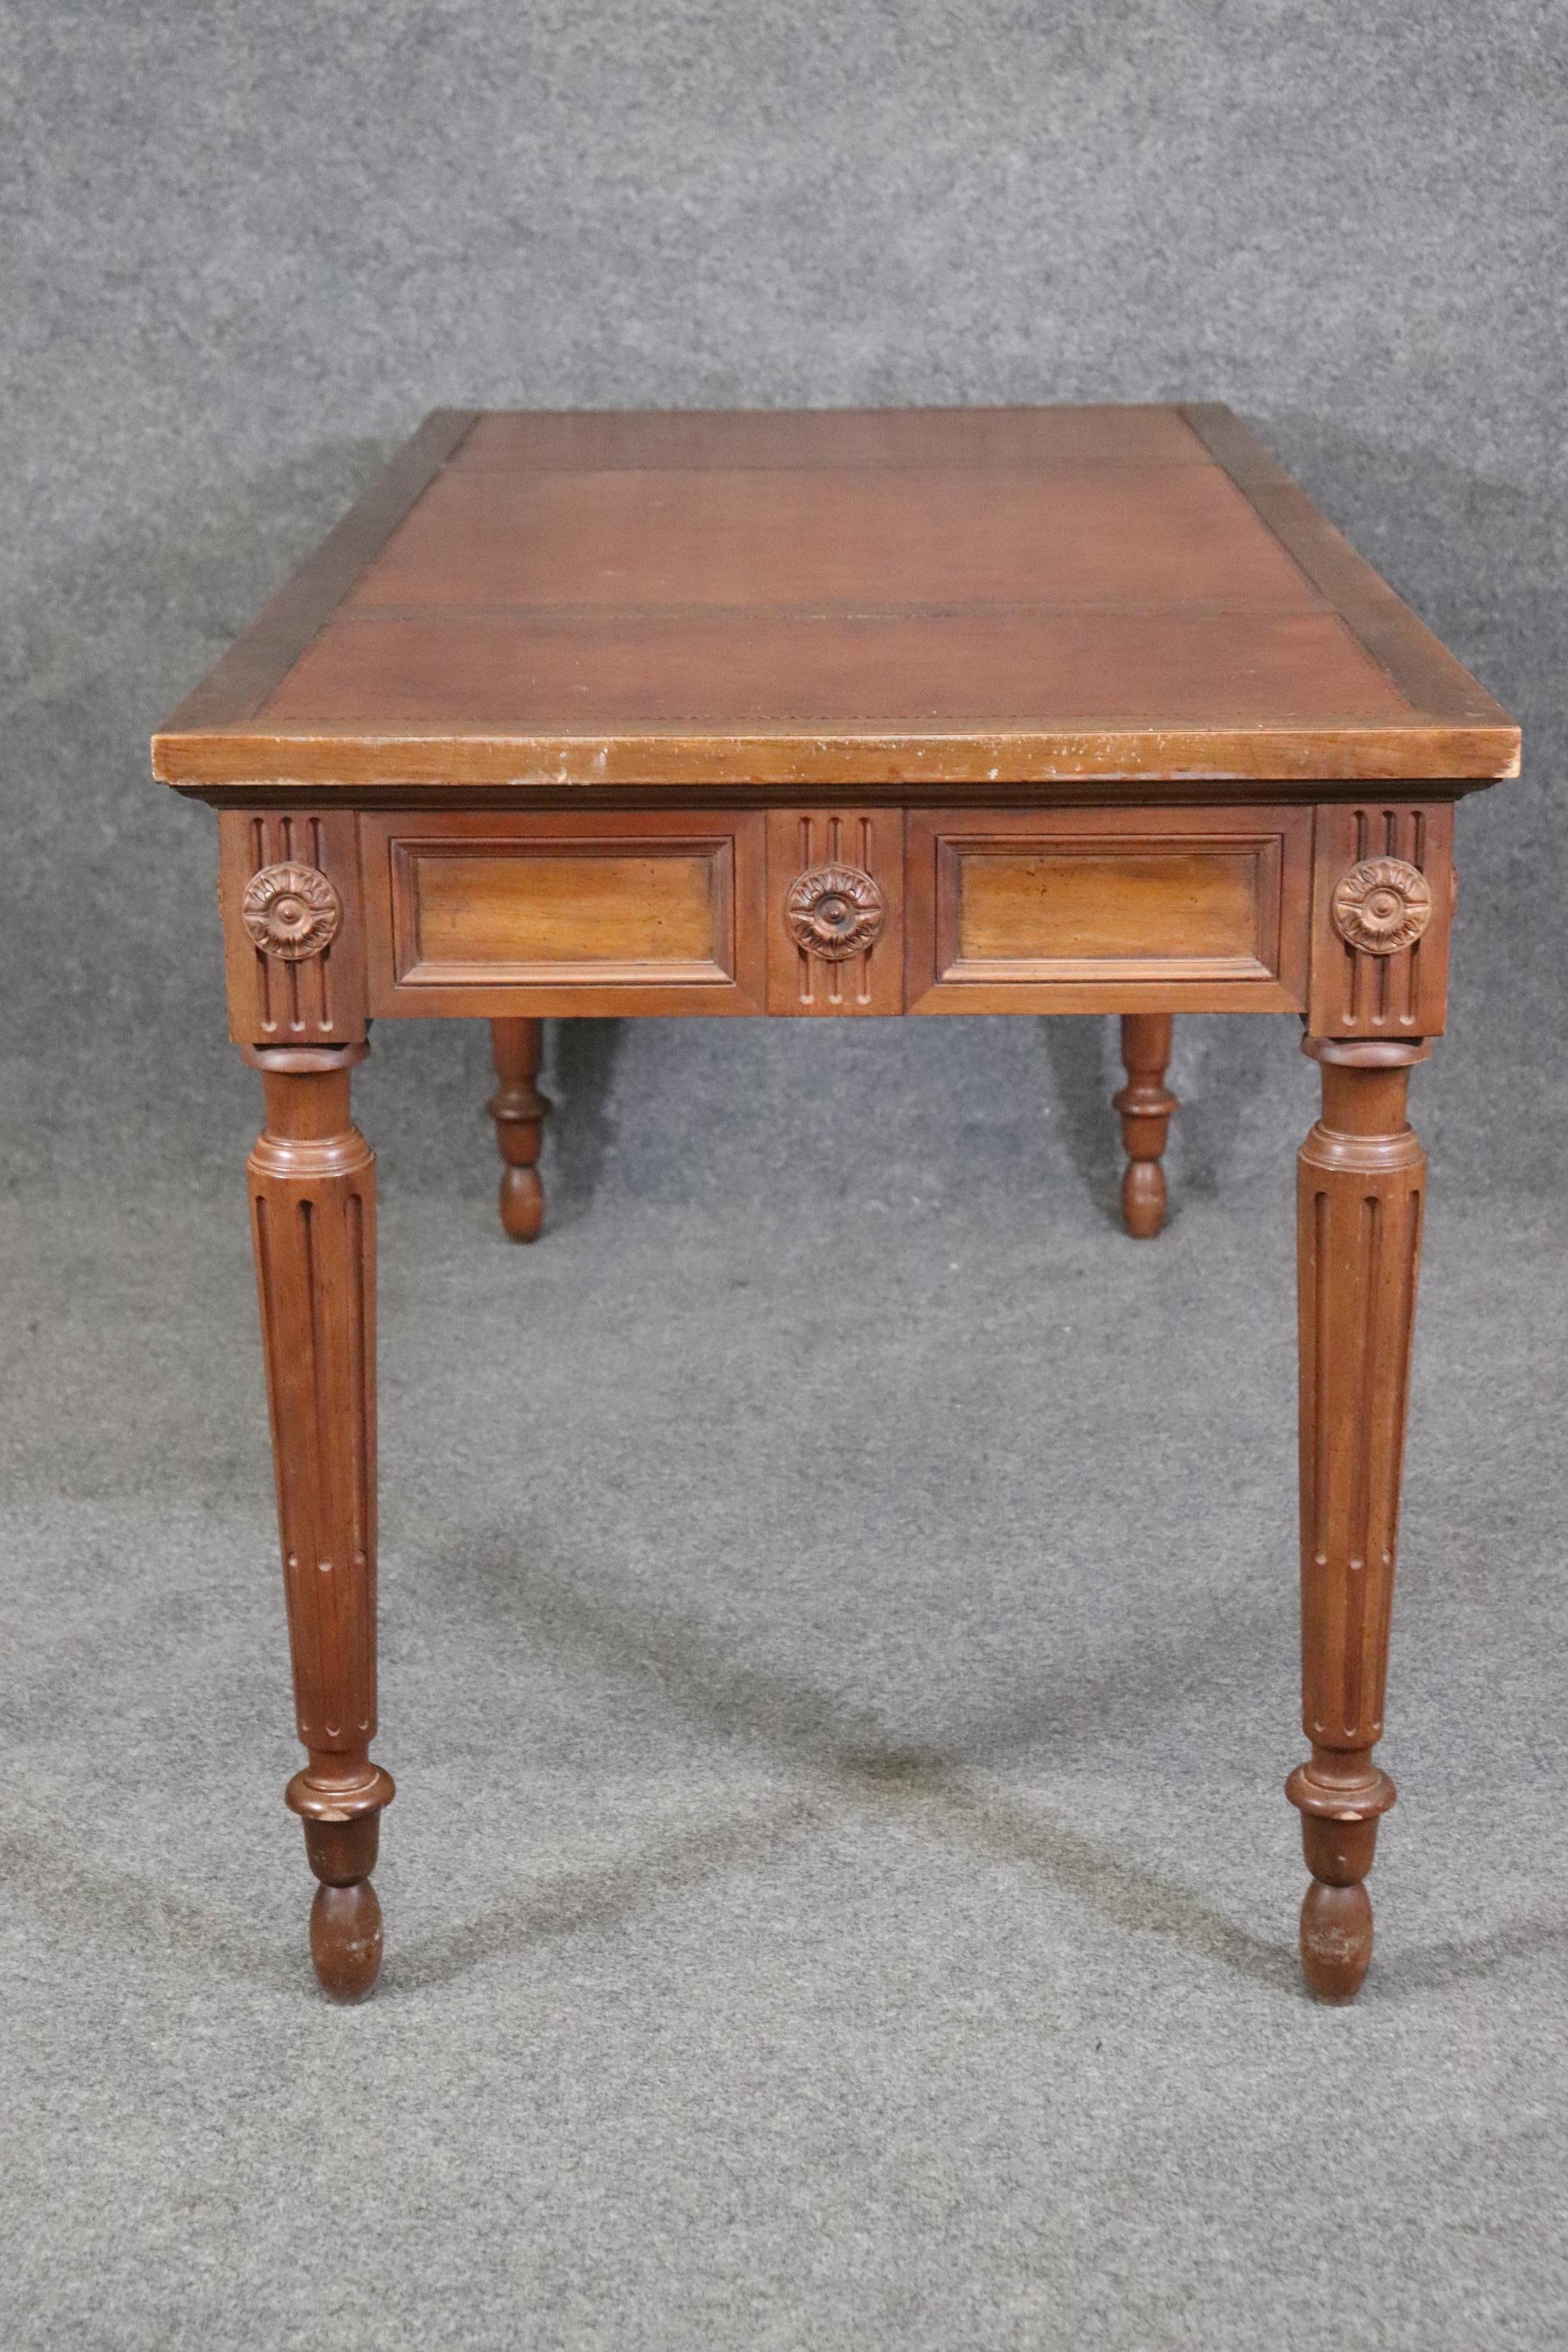 Fine Quality Baker Furniture Company Embossed Leather Top Louis XVI Style Desk  3